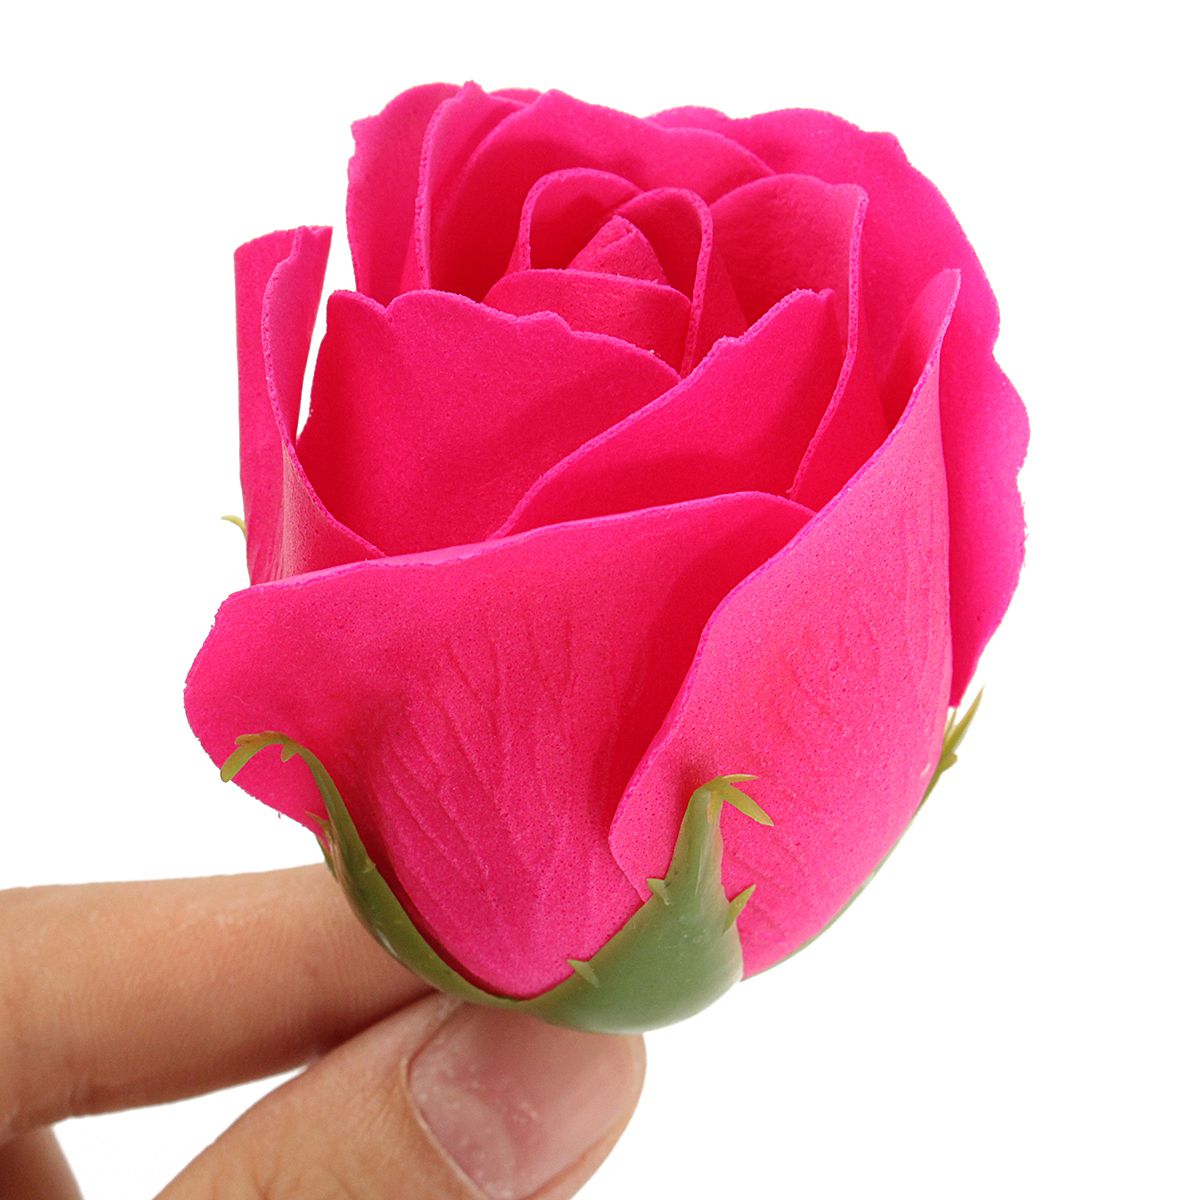 Simulation-Artificial-Rose-Soap-Flower-For-Wedding-Party-Home-Decoration-Valentines-Day-Gift-1069981-9